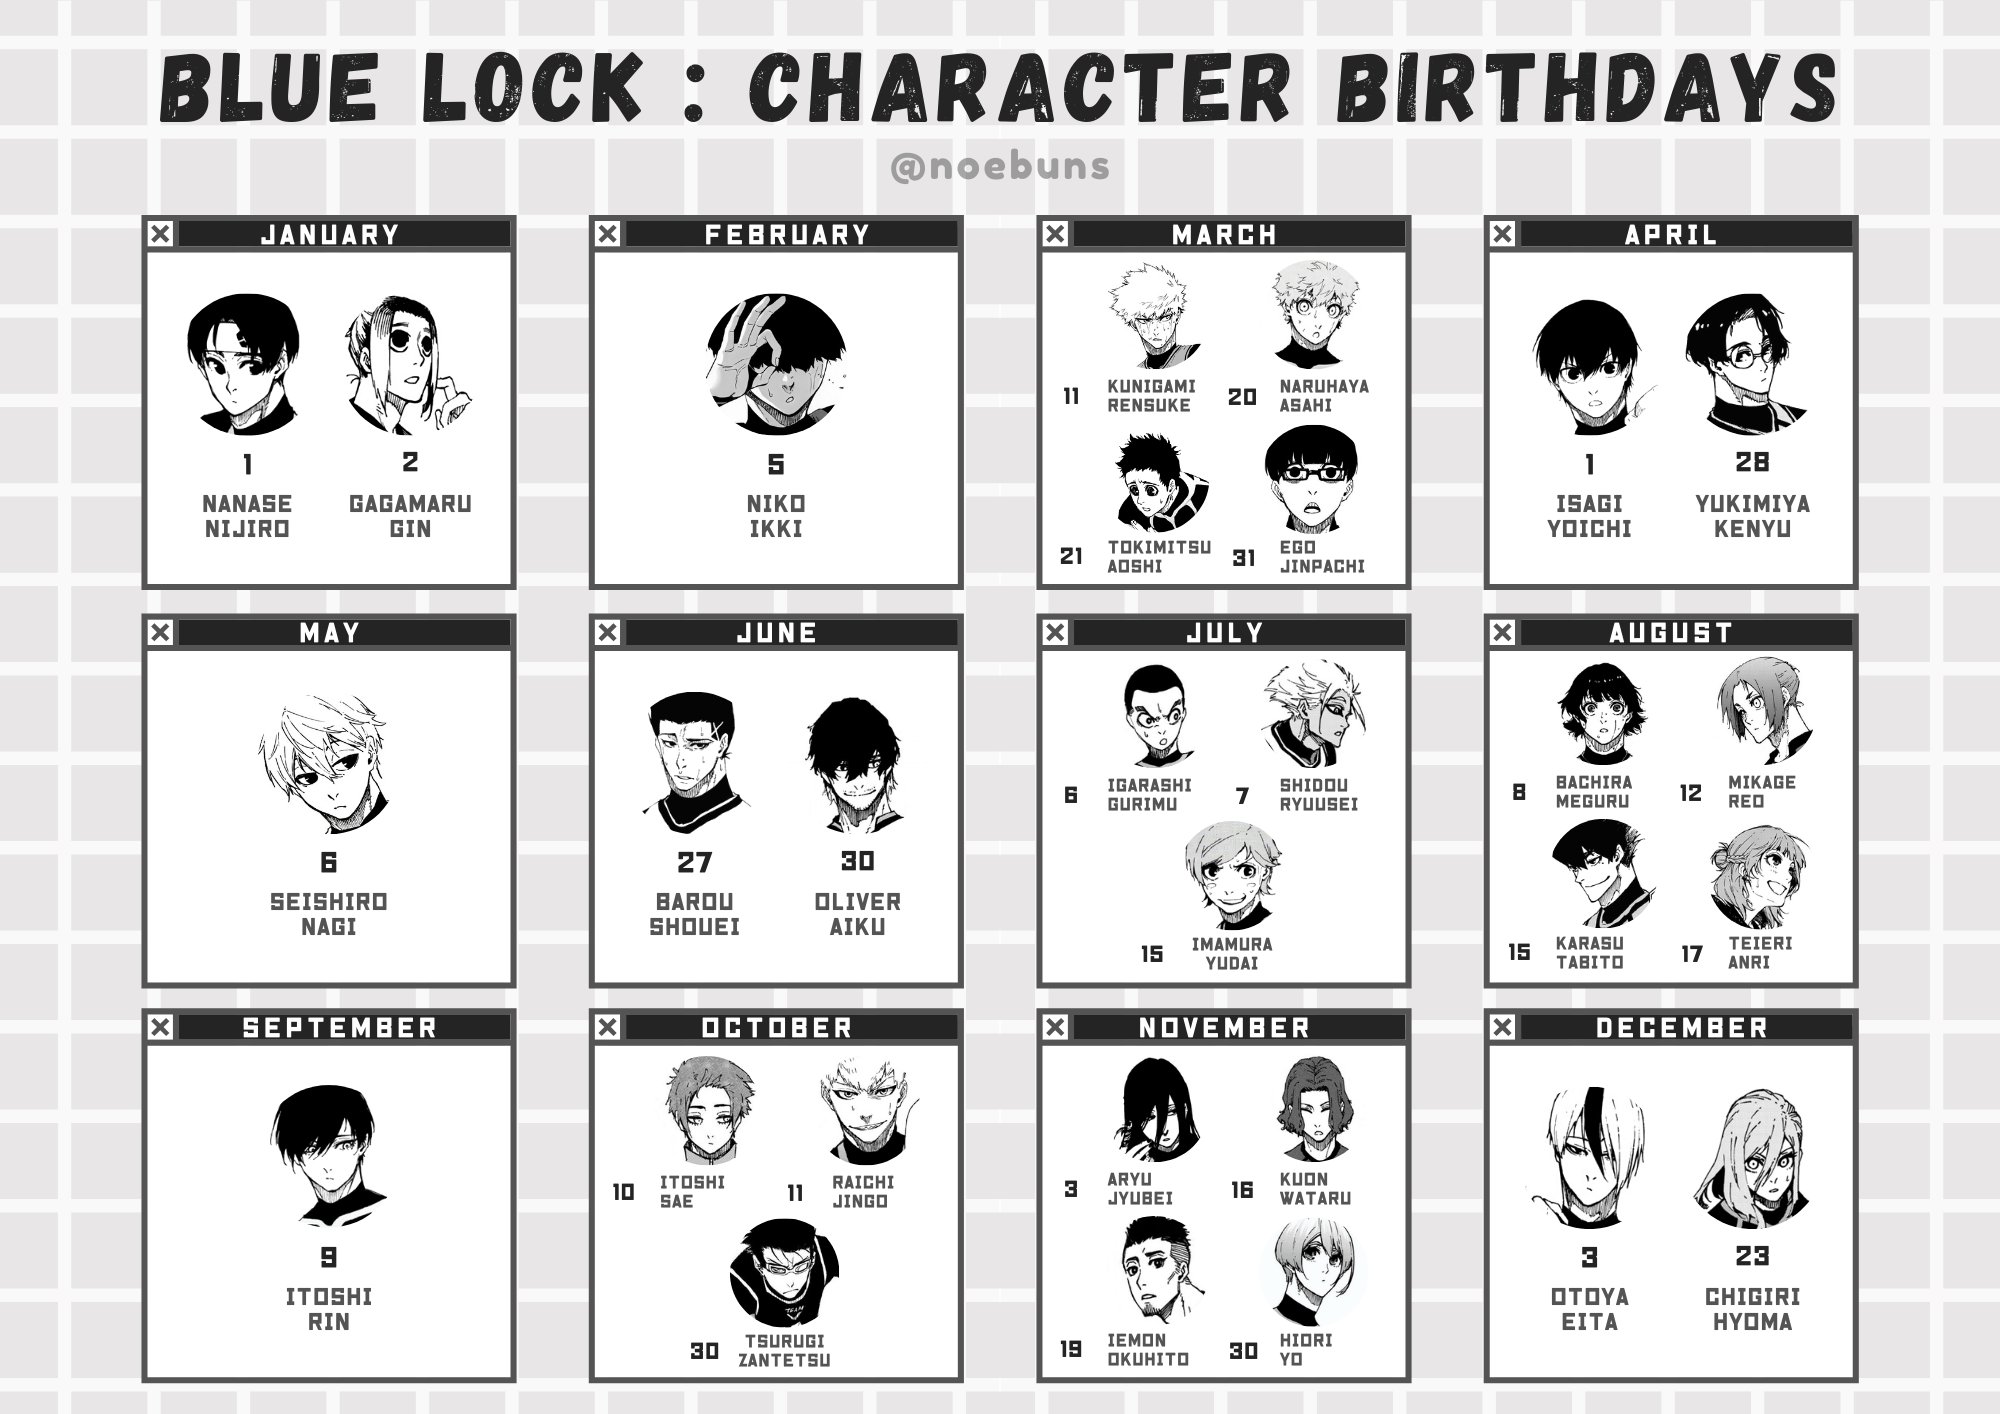 What blue lock character am i